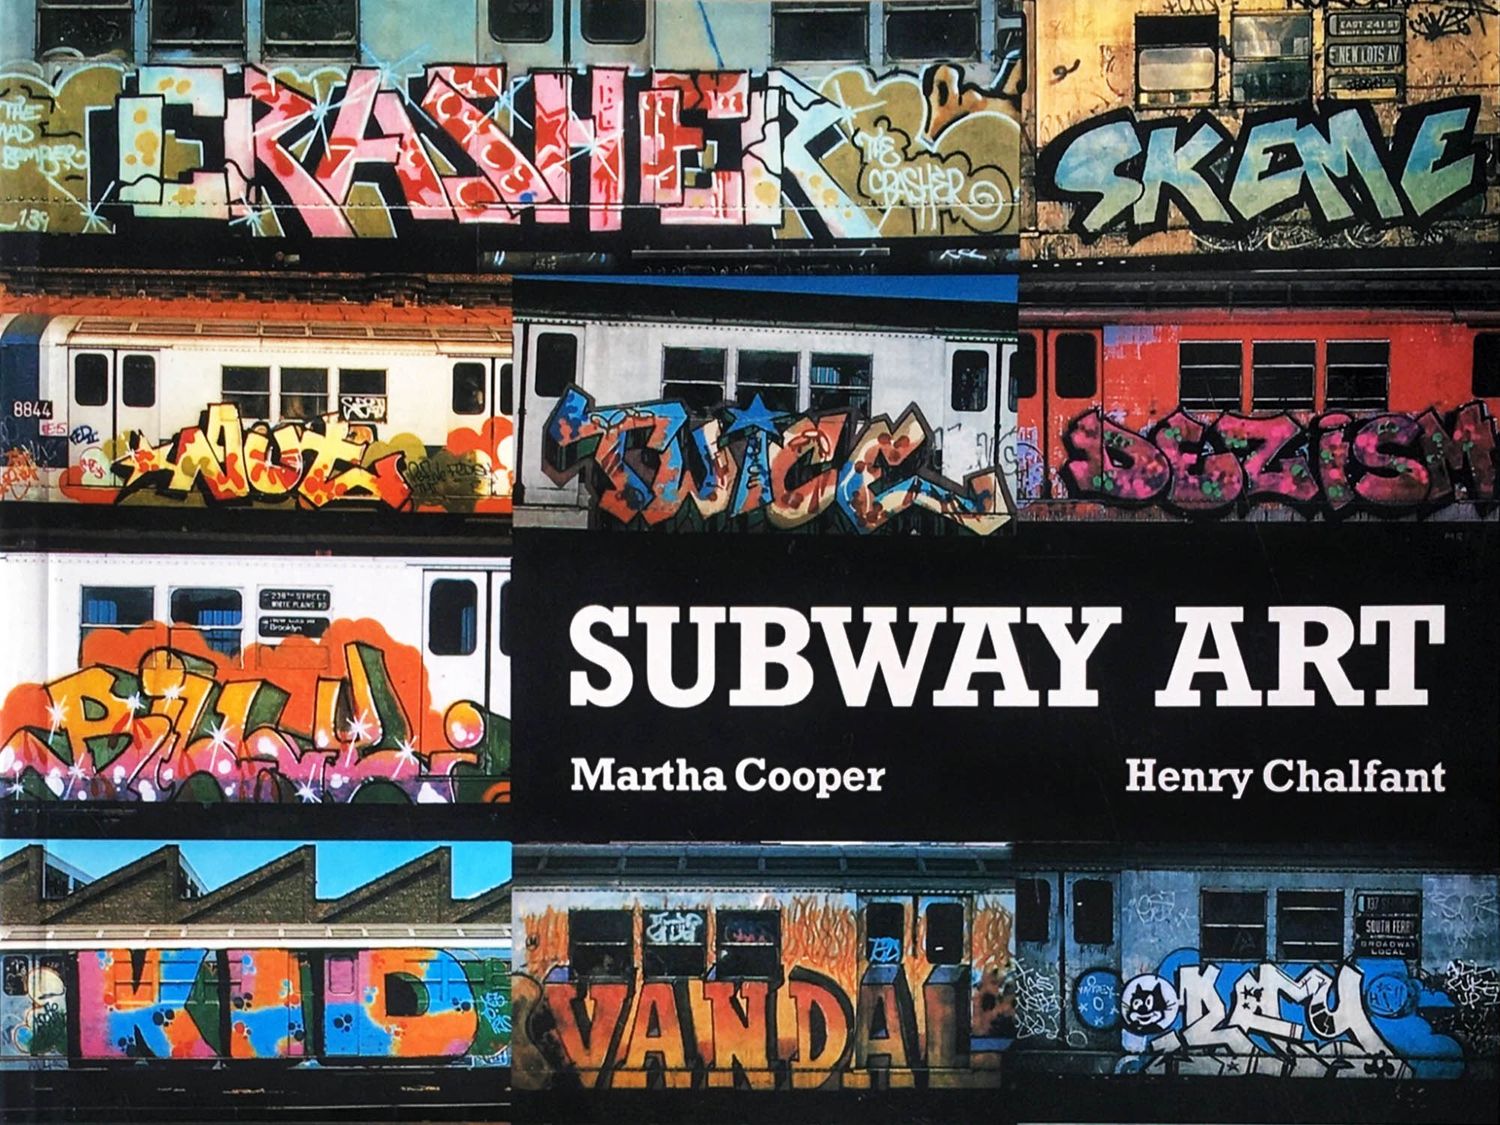 Published in 1984, the book "Subway Art" brings together a selection of photographs captured by Martha Cooper and Henry Chalfant that will influence an entire generation in Europe.